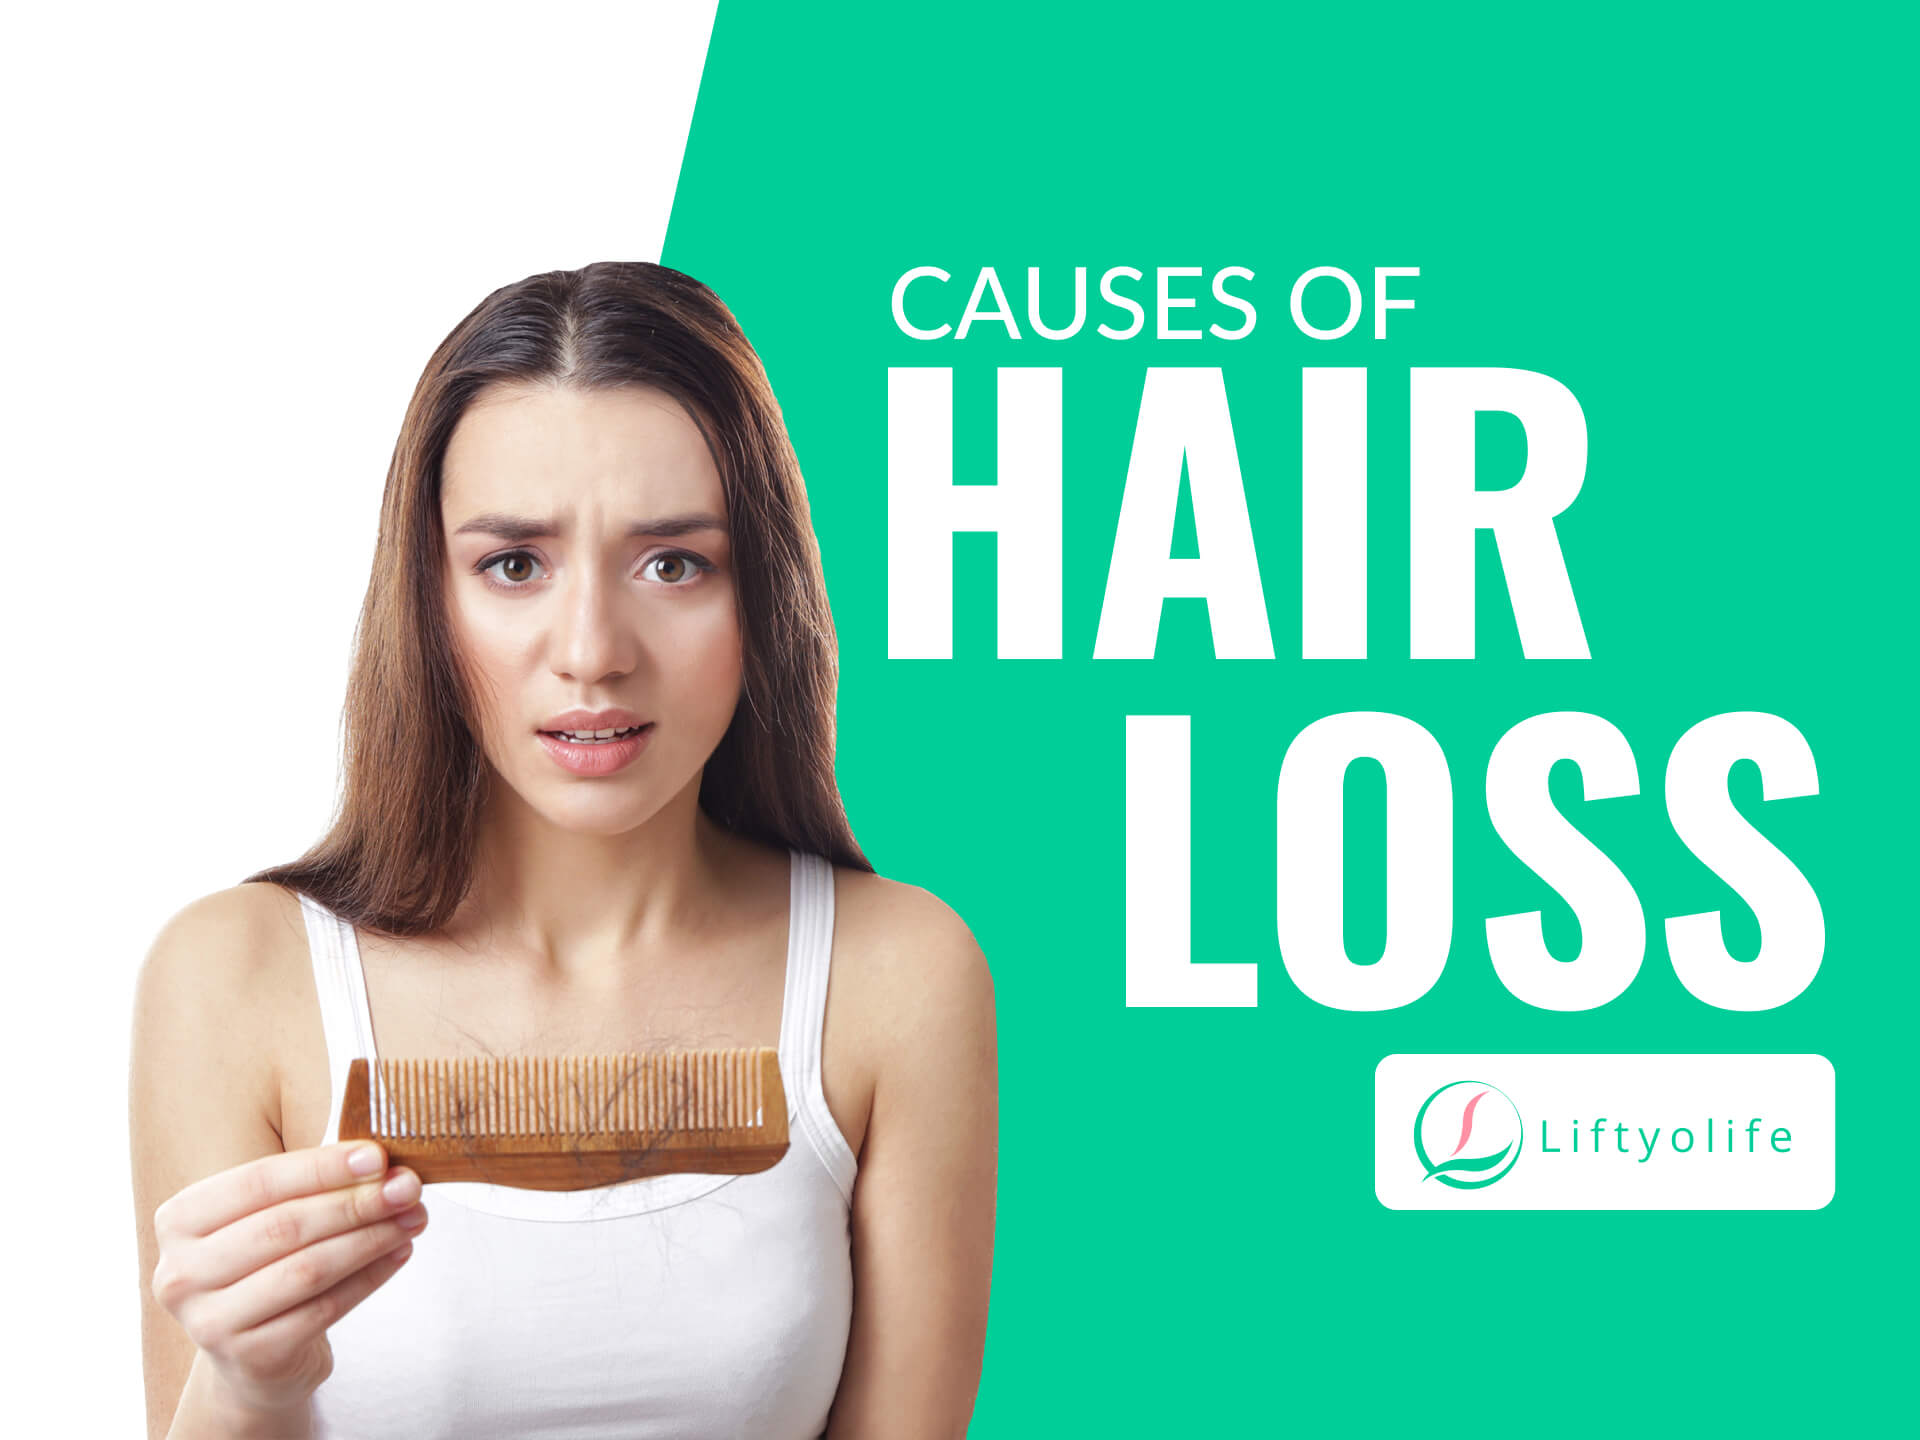 Hair Loss Causes And How To Distinguish?